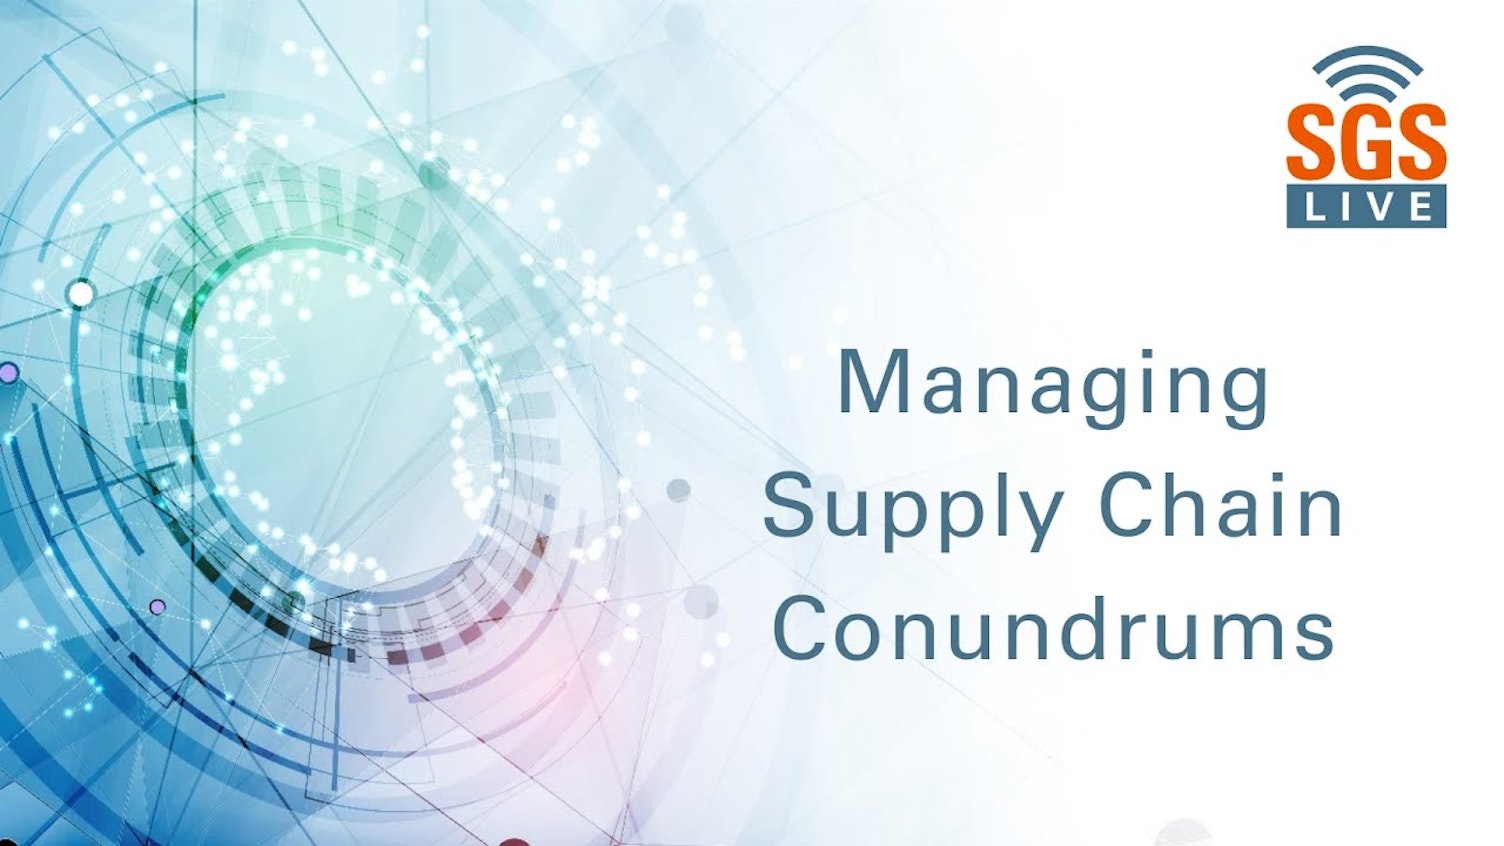 SGS Live presents: Managing supply chain conundrums - a sample management services approach